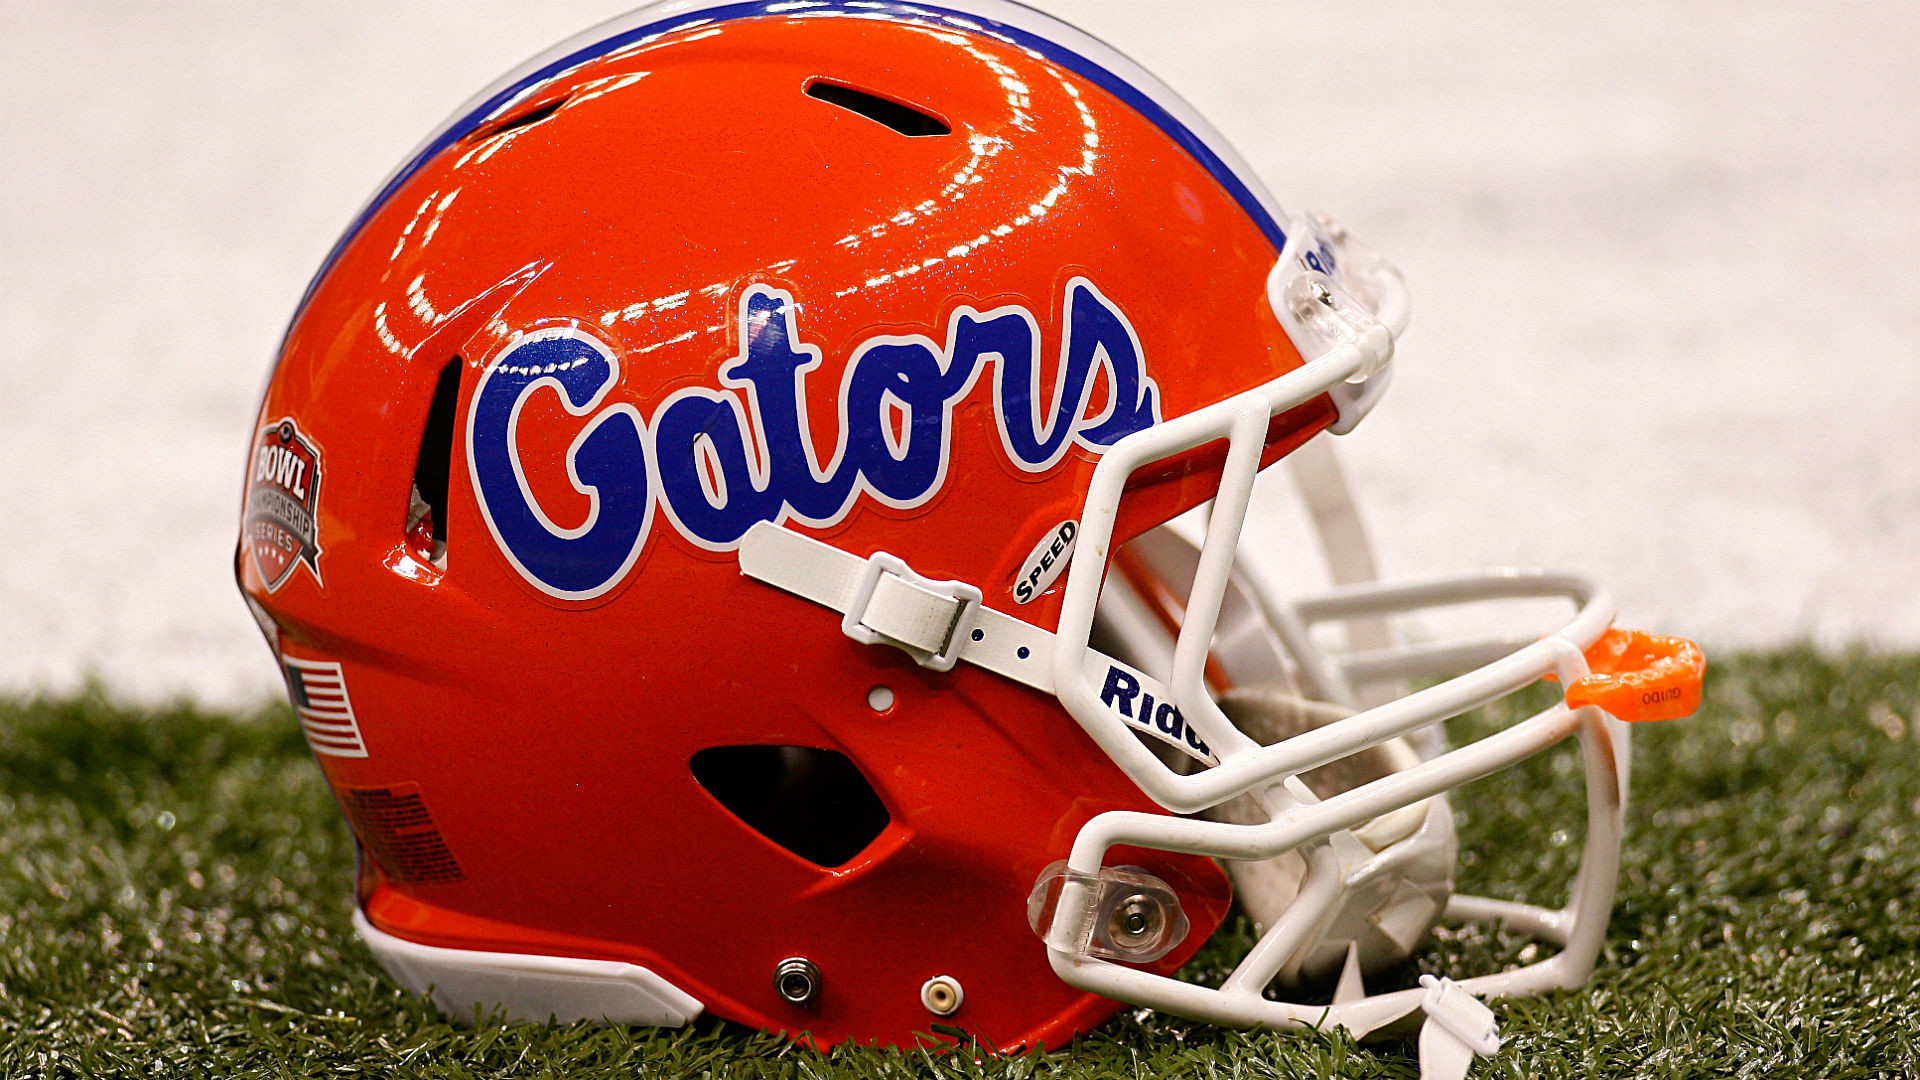 1920x1080 ... backgrounds for florida gators florida state background www ...